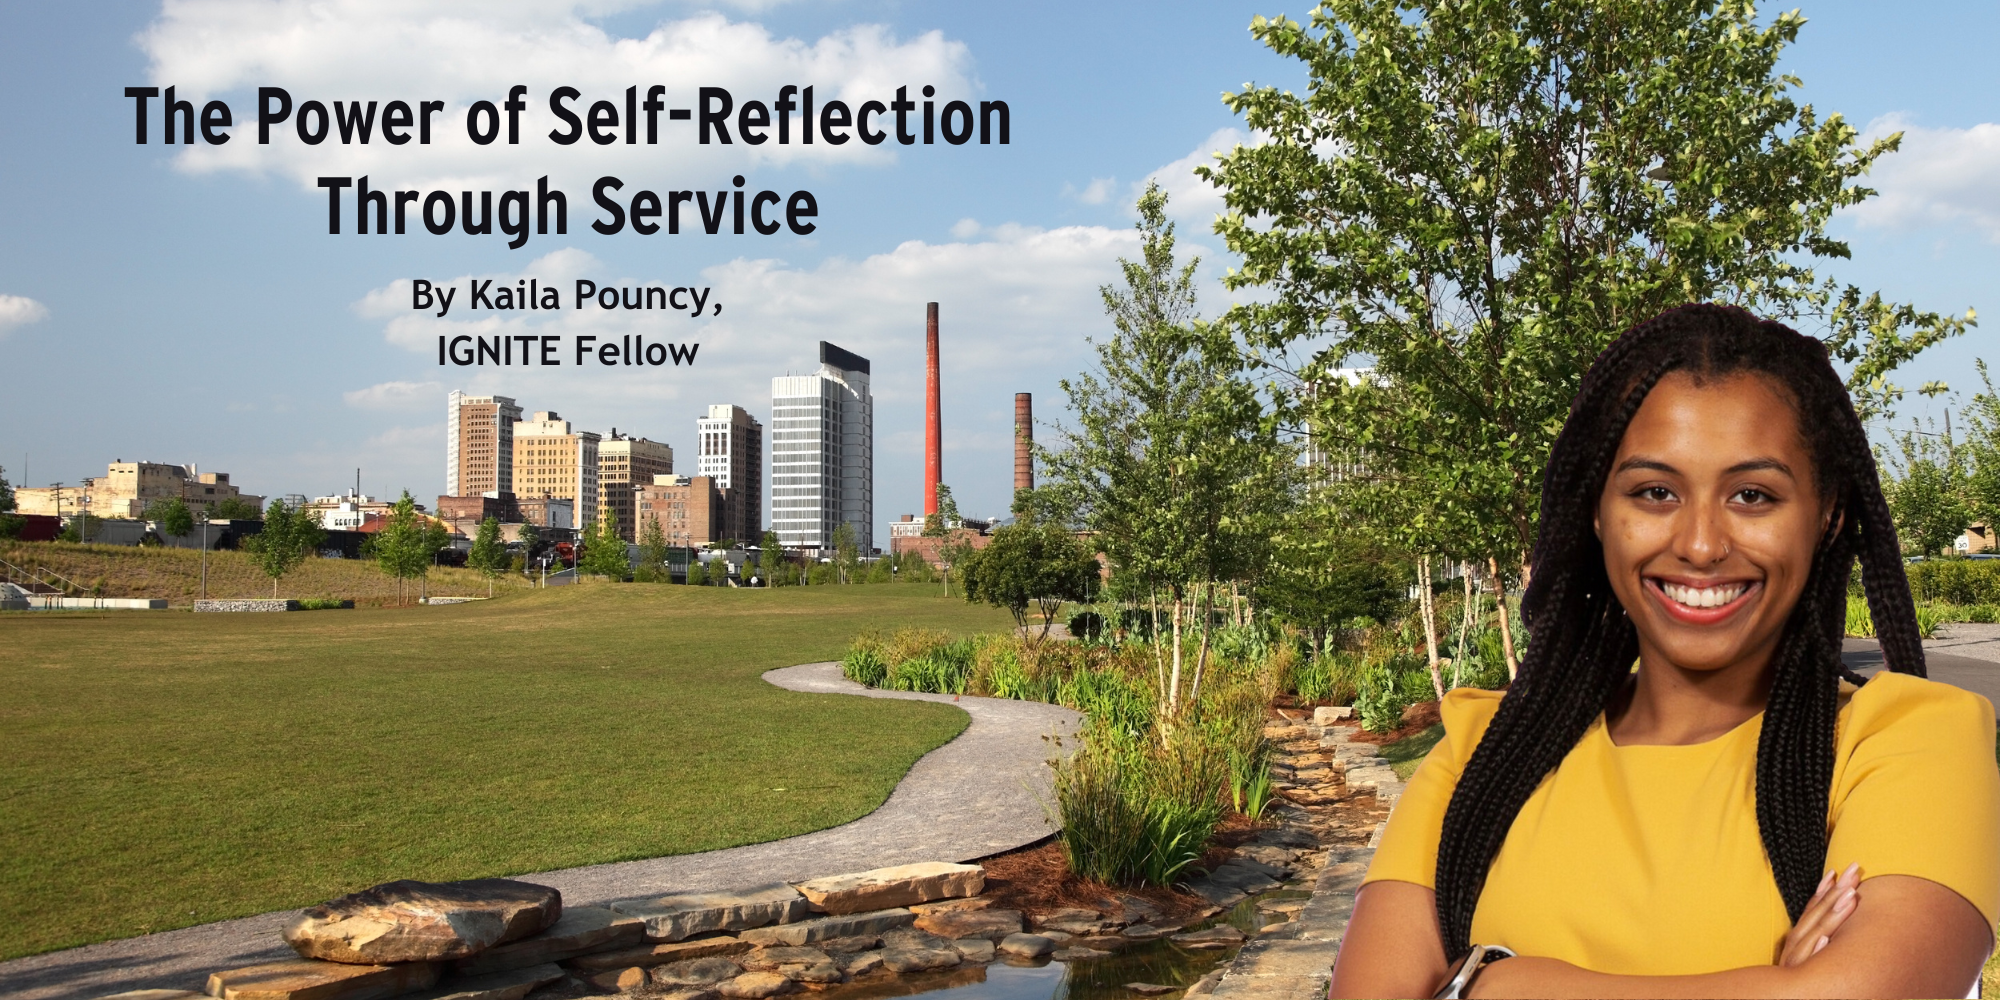 The Power of Self-Reflection Through Service by IGNITE Fellow Kaila Pouncy